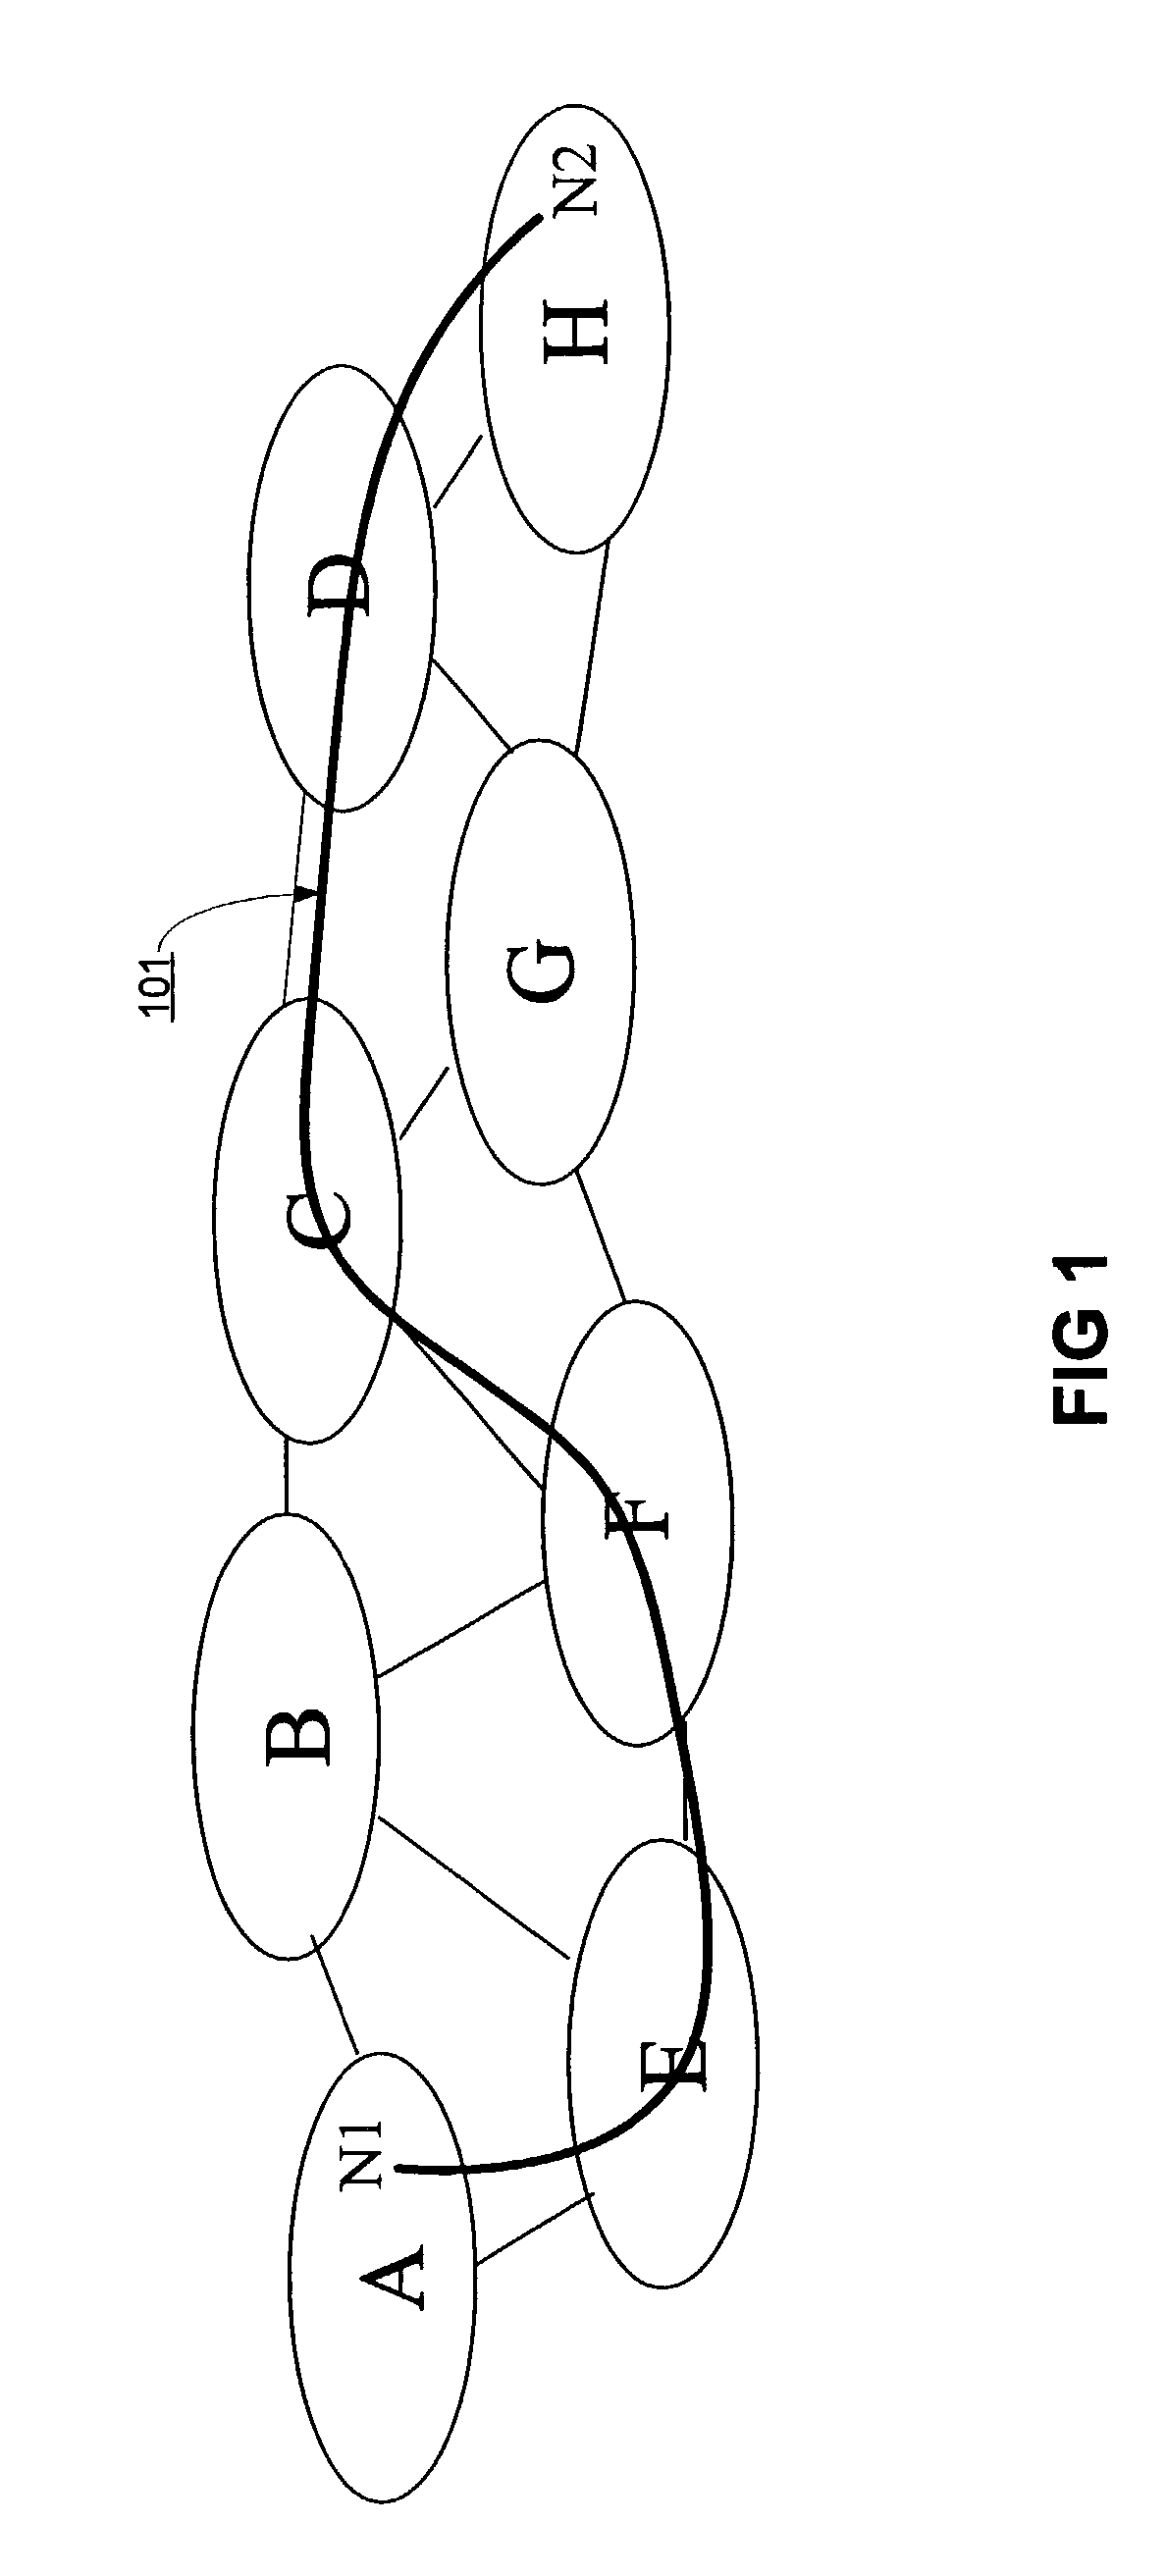 Prohibit or avoid route mechanism for path setup